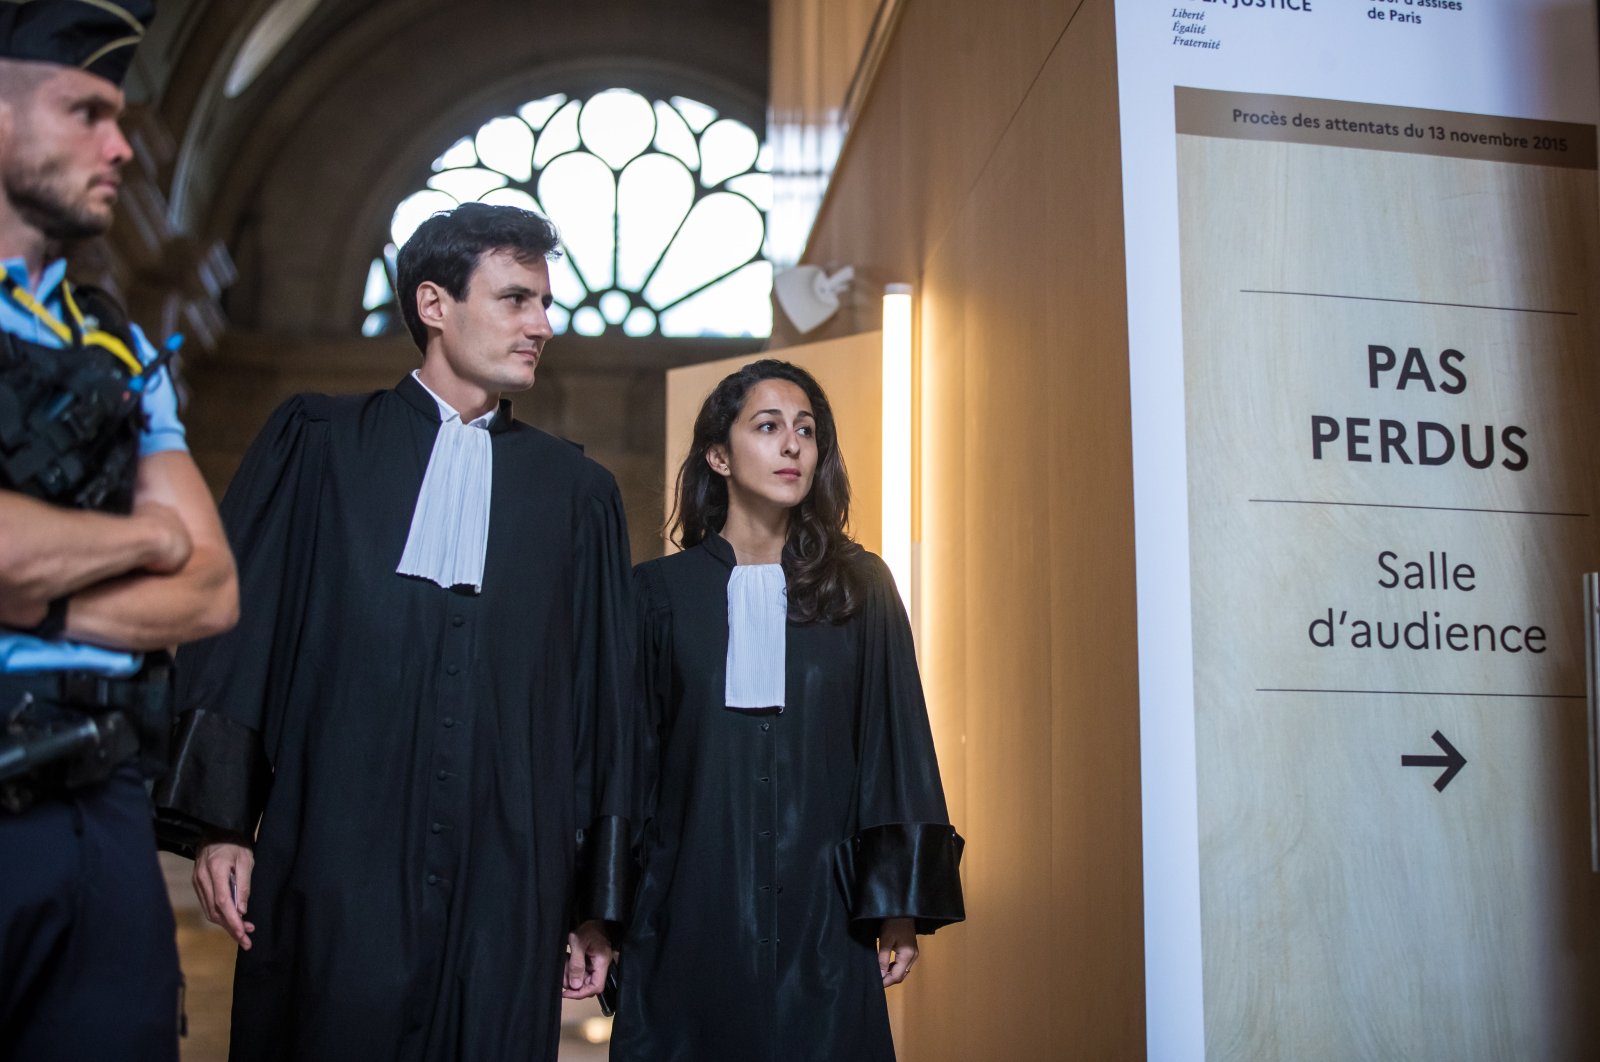 Salah Abdeslam&#039;s French lawyers Olivia Ronen (R) and Martin Vettes (L) arrive to enter the audience room on the day of the verdict&#039;s announcement of the trial for the 2015 Paris terrorist attacks, Paris, France, June 29, 2022. (EPA Photo)